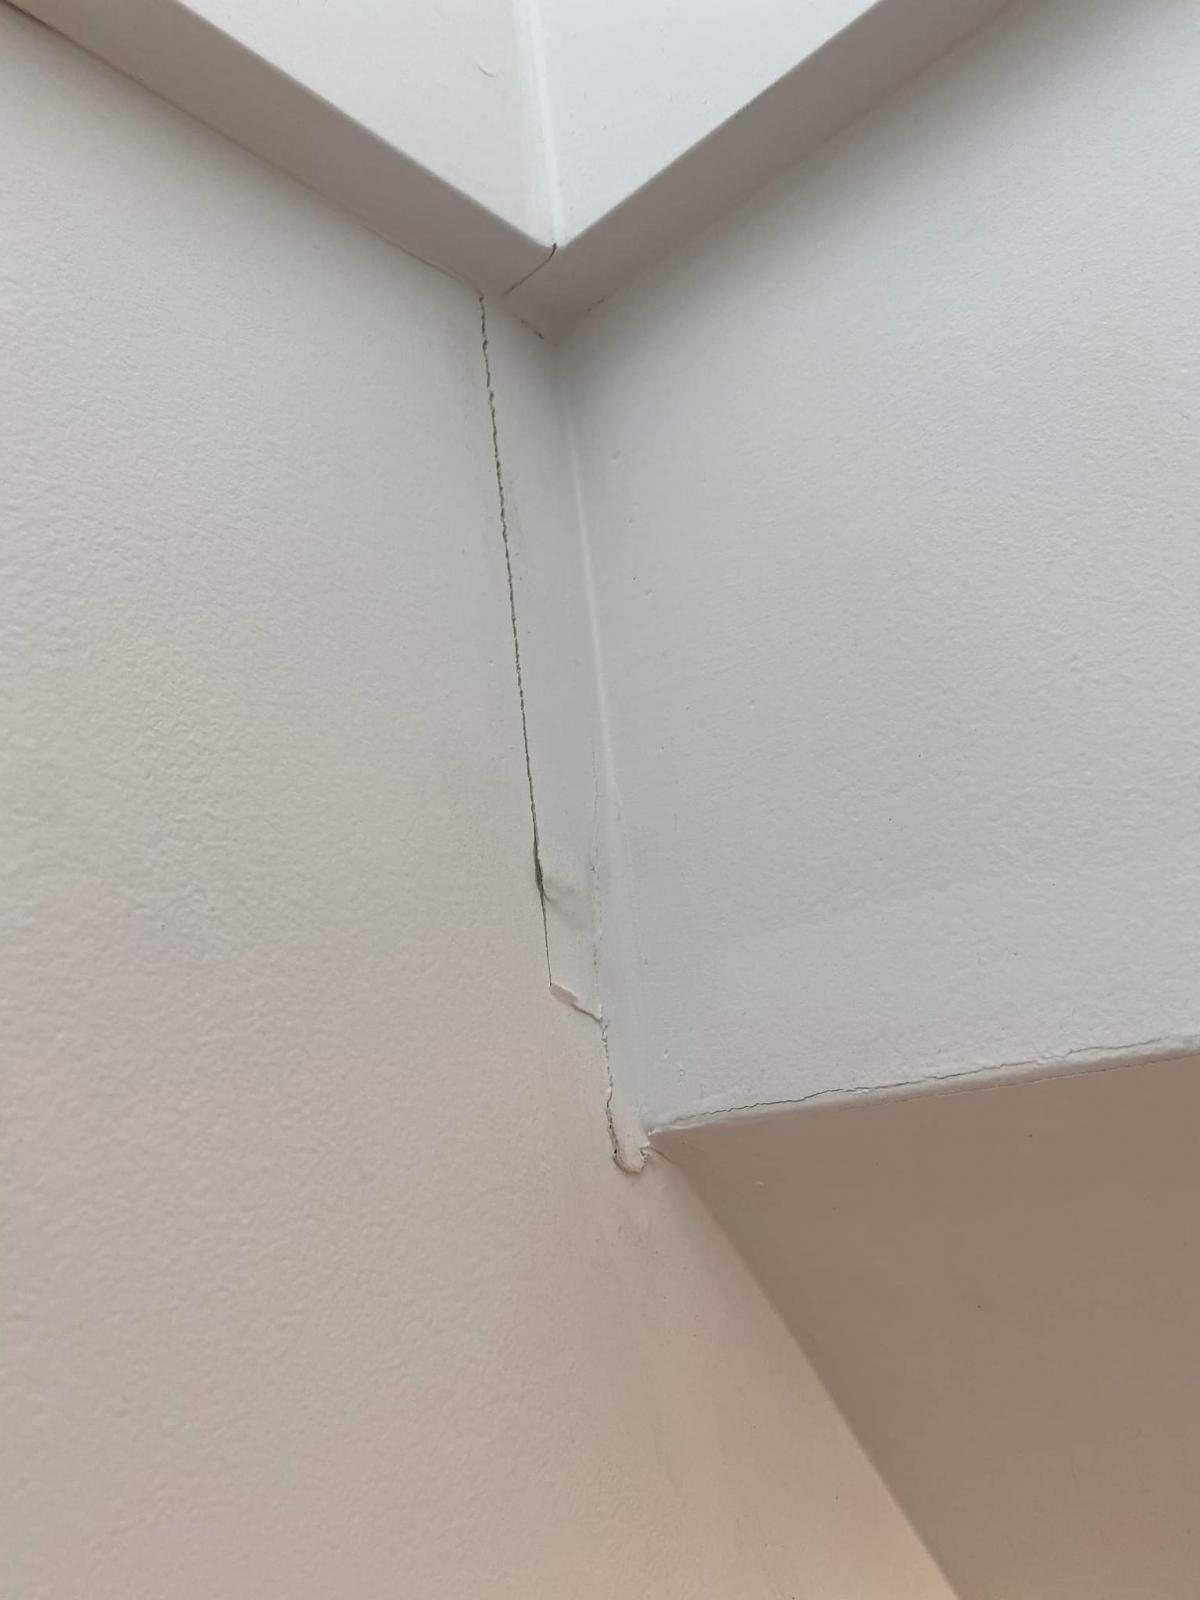 Cracking on beam joining with wall - concern ?